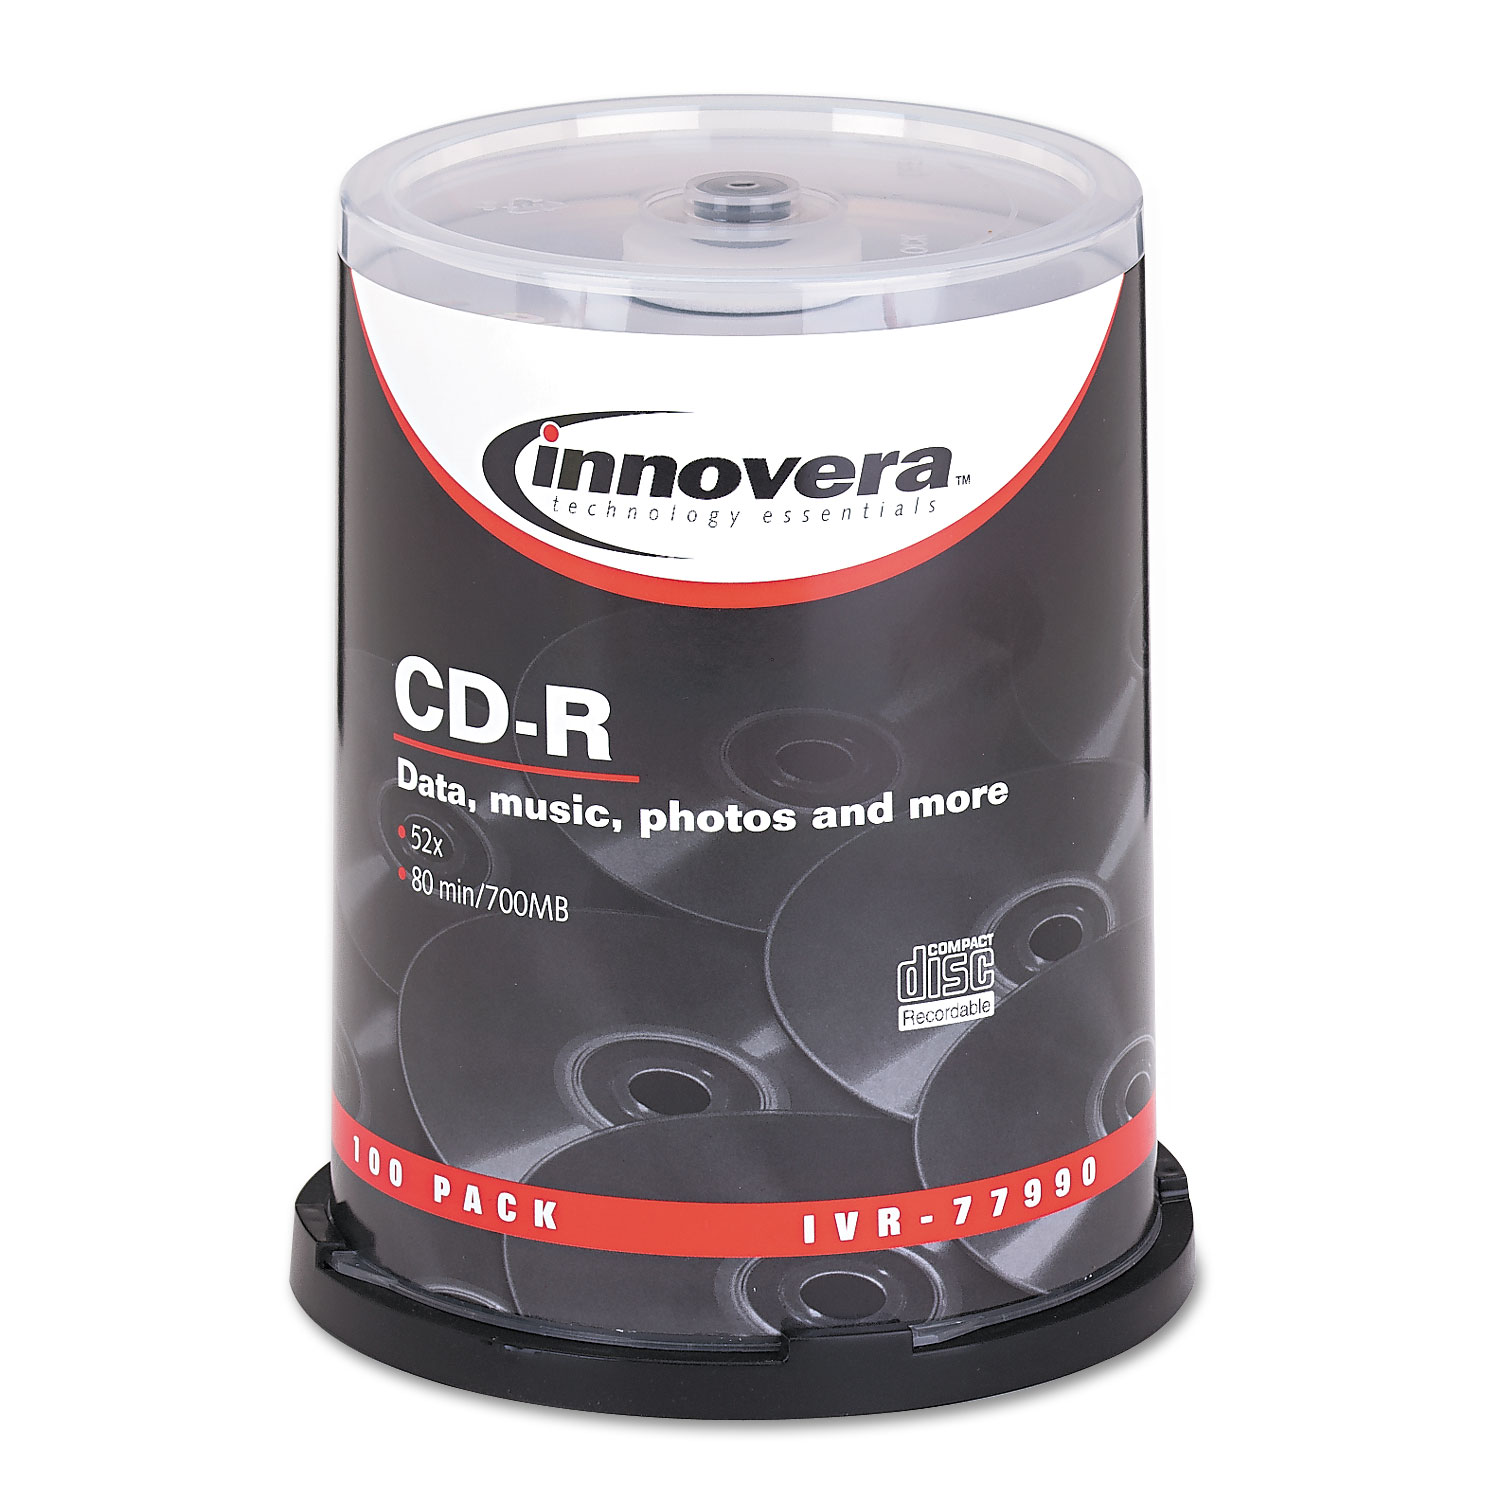  Innovera IVR77990 CD-R Discs, 700MB/80min, 52x, Spindle, Silver, 100/Pack (IVR77990) 